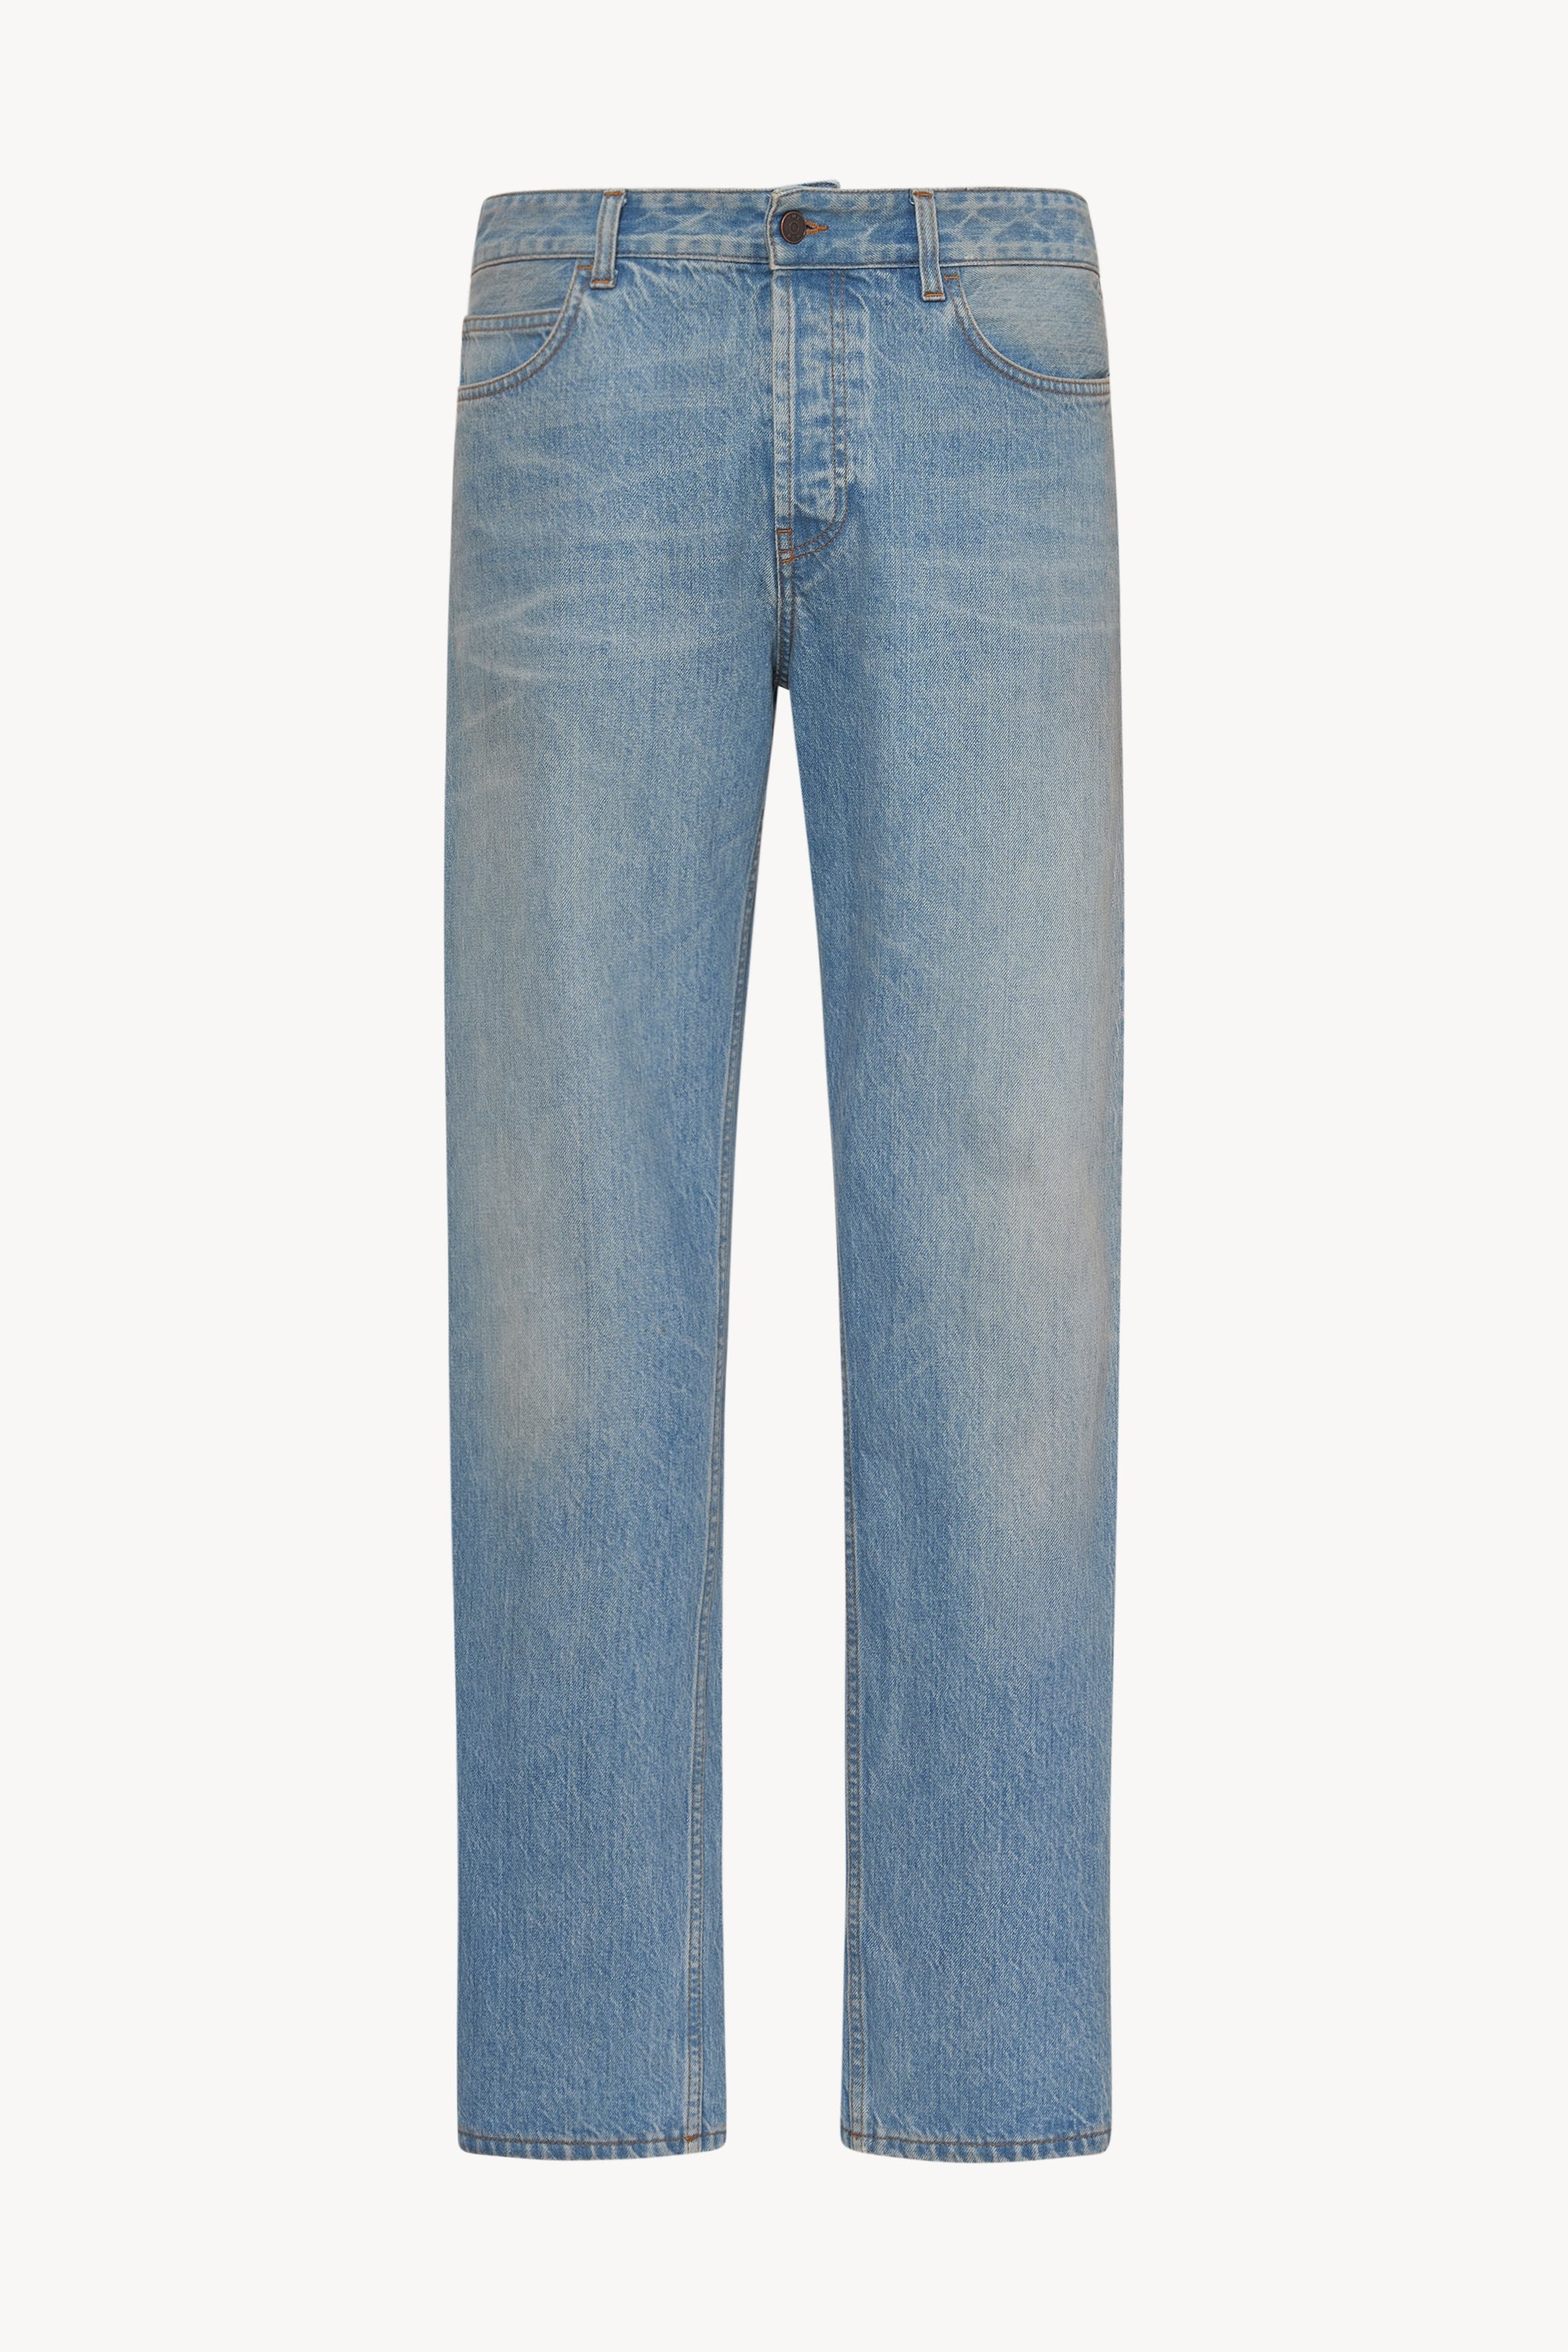 Carlisle Jeans in Cotton - 1